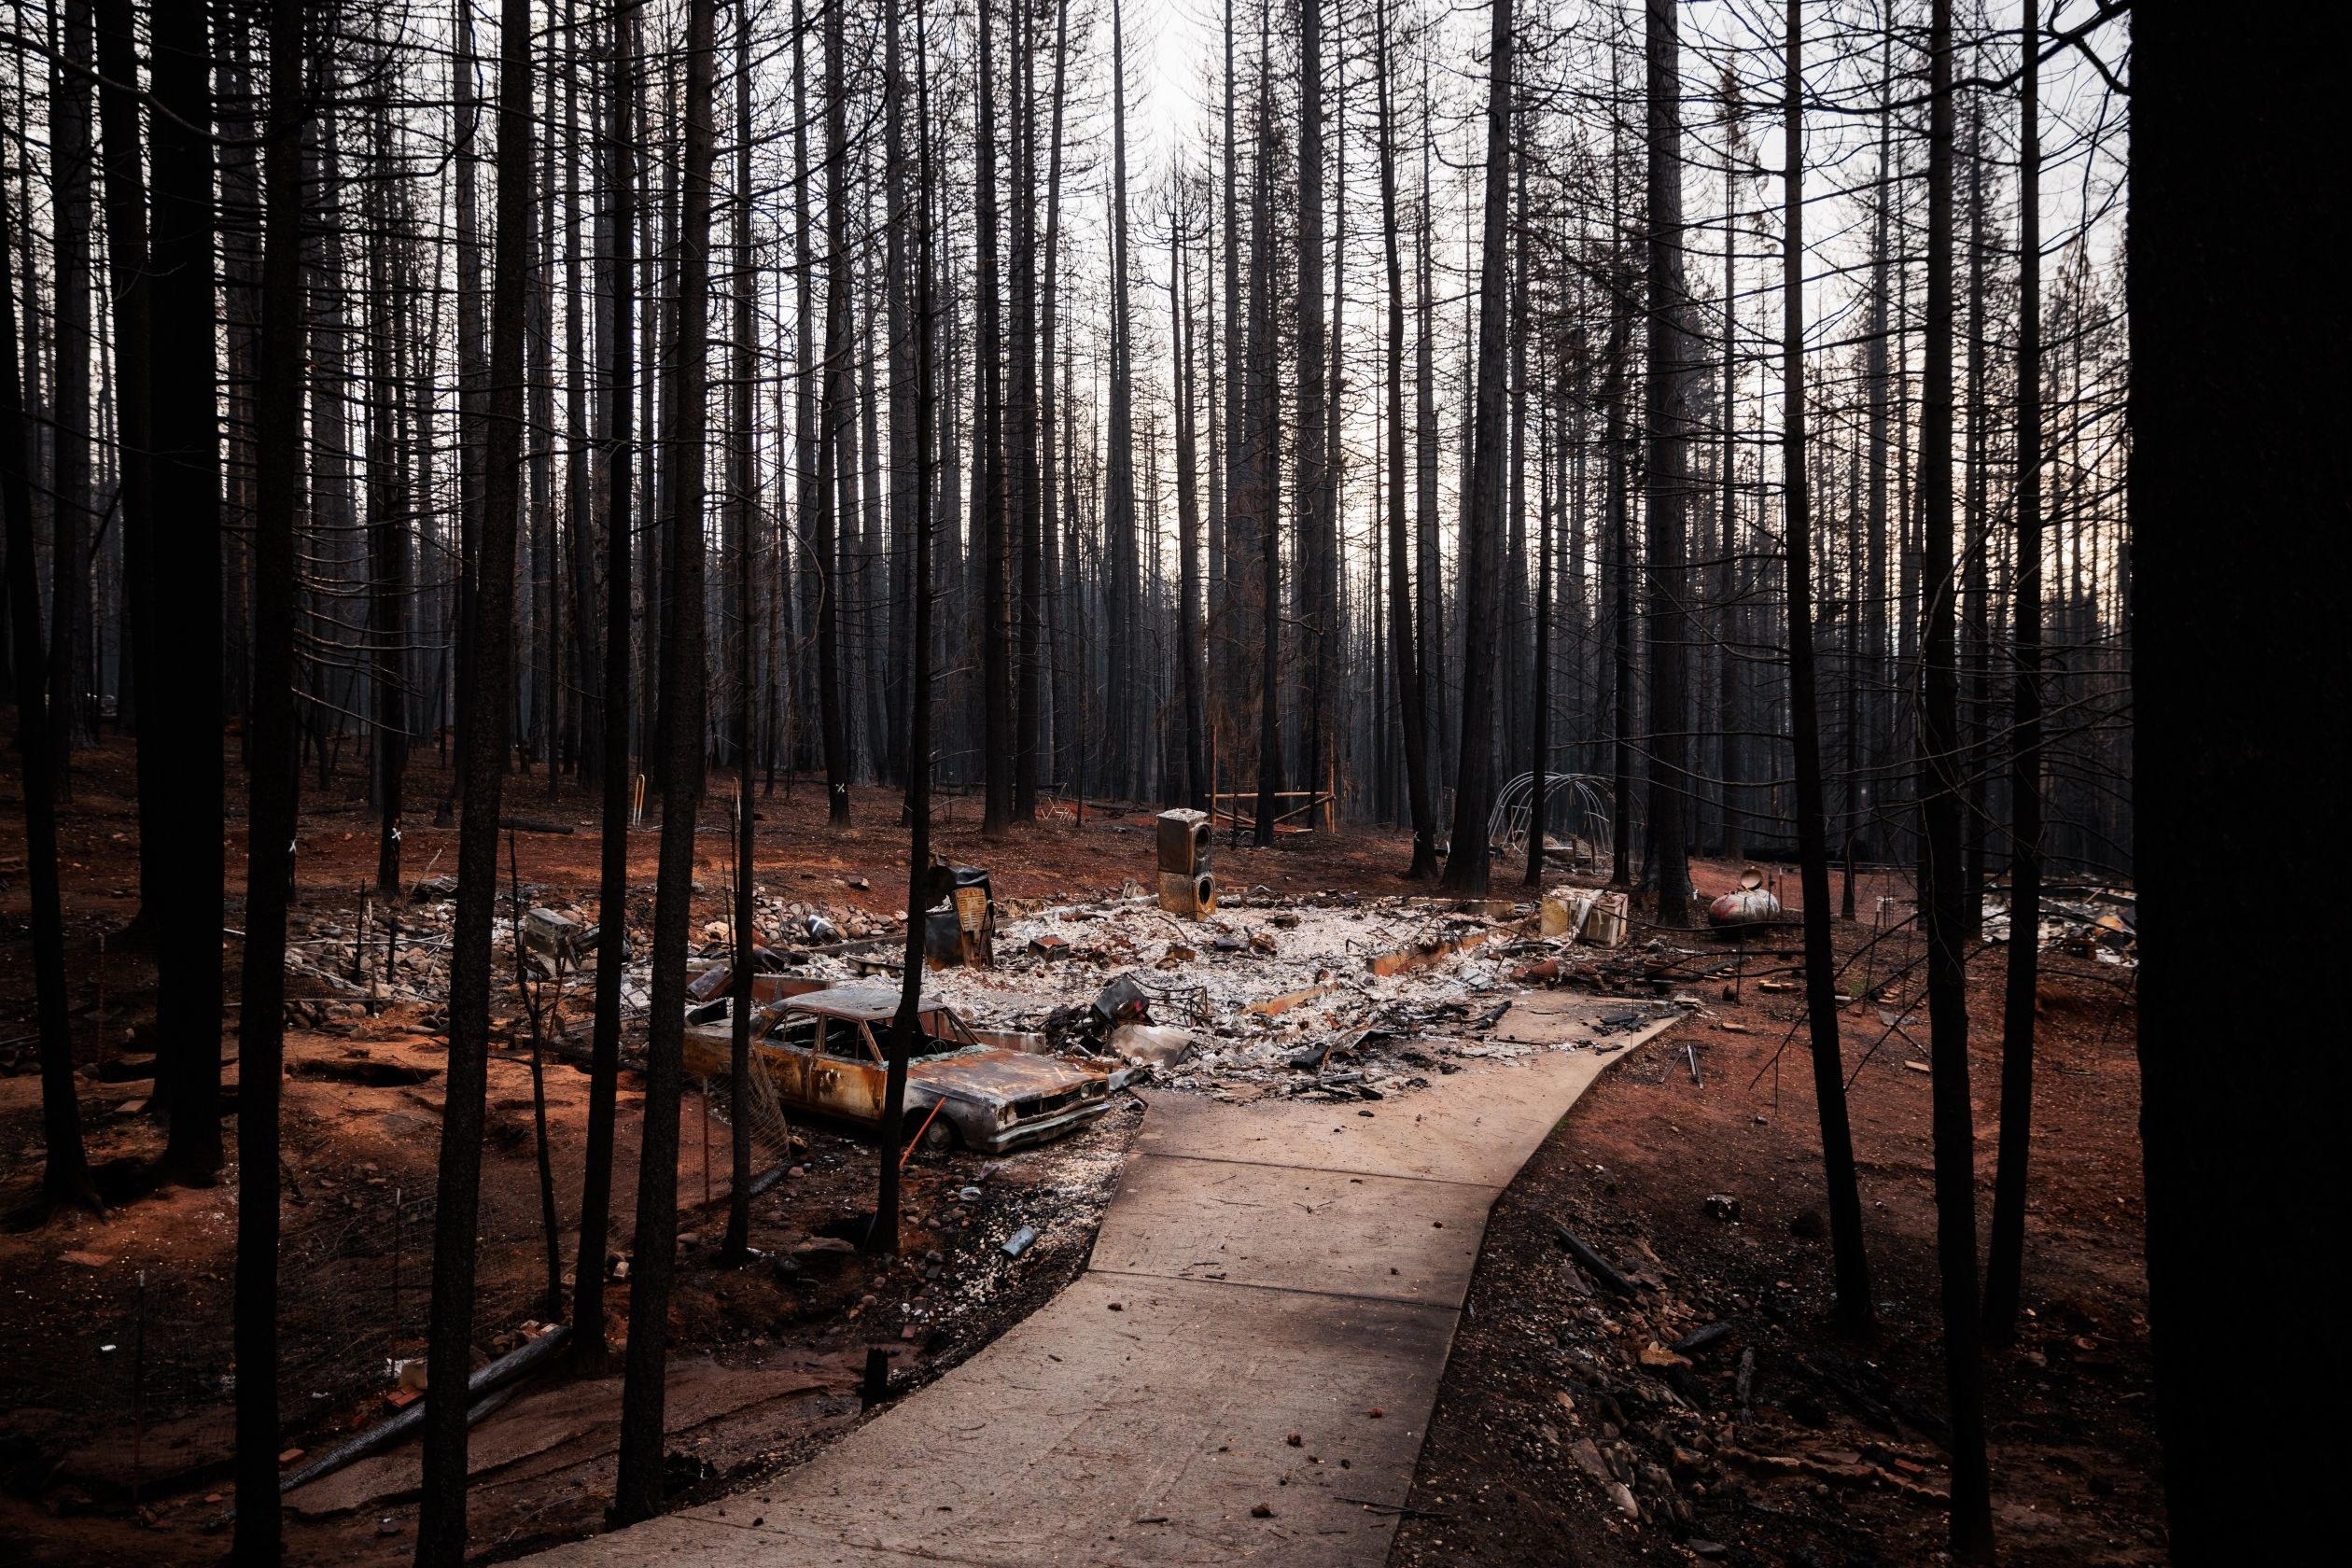 A road ends in ash remnants and debris after a fire, surrounded by bare trees